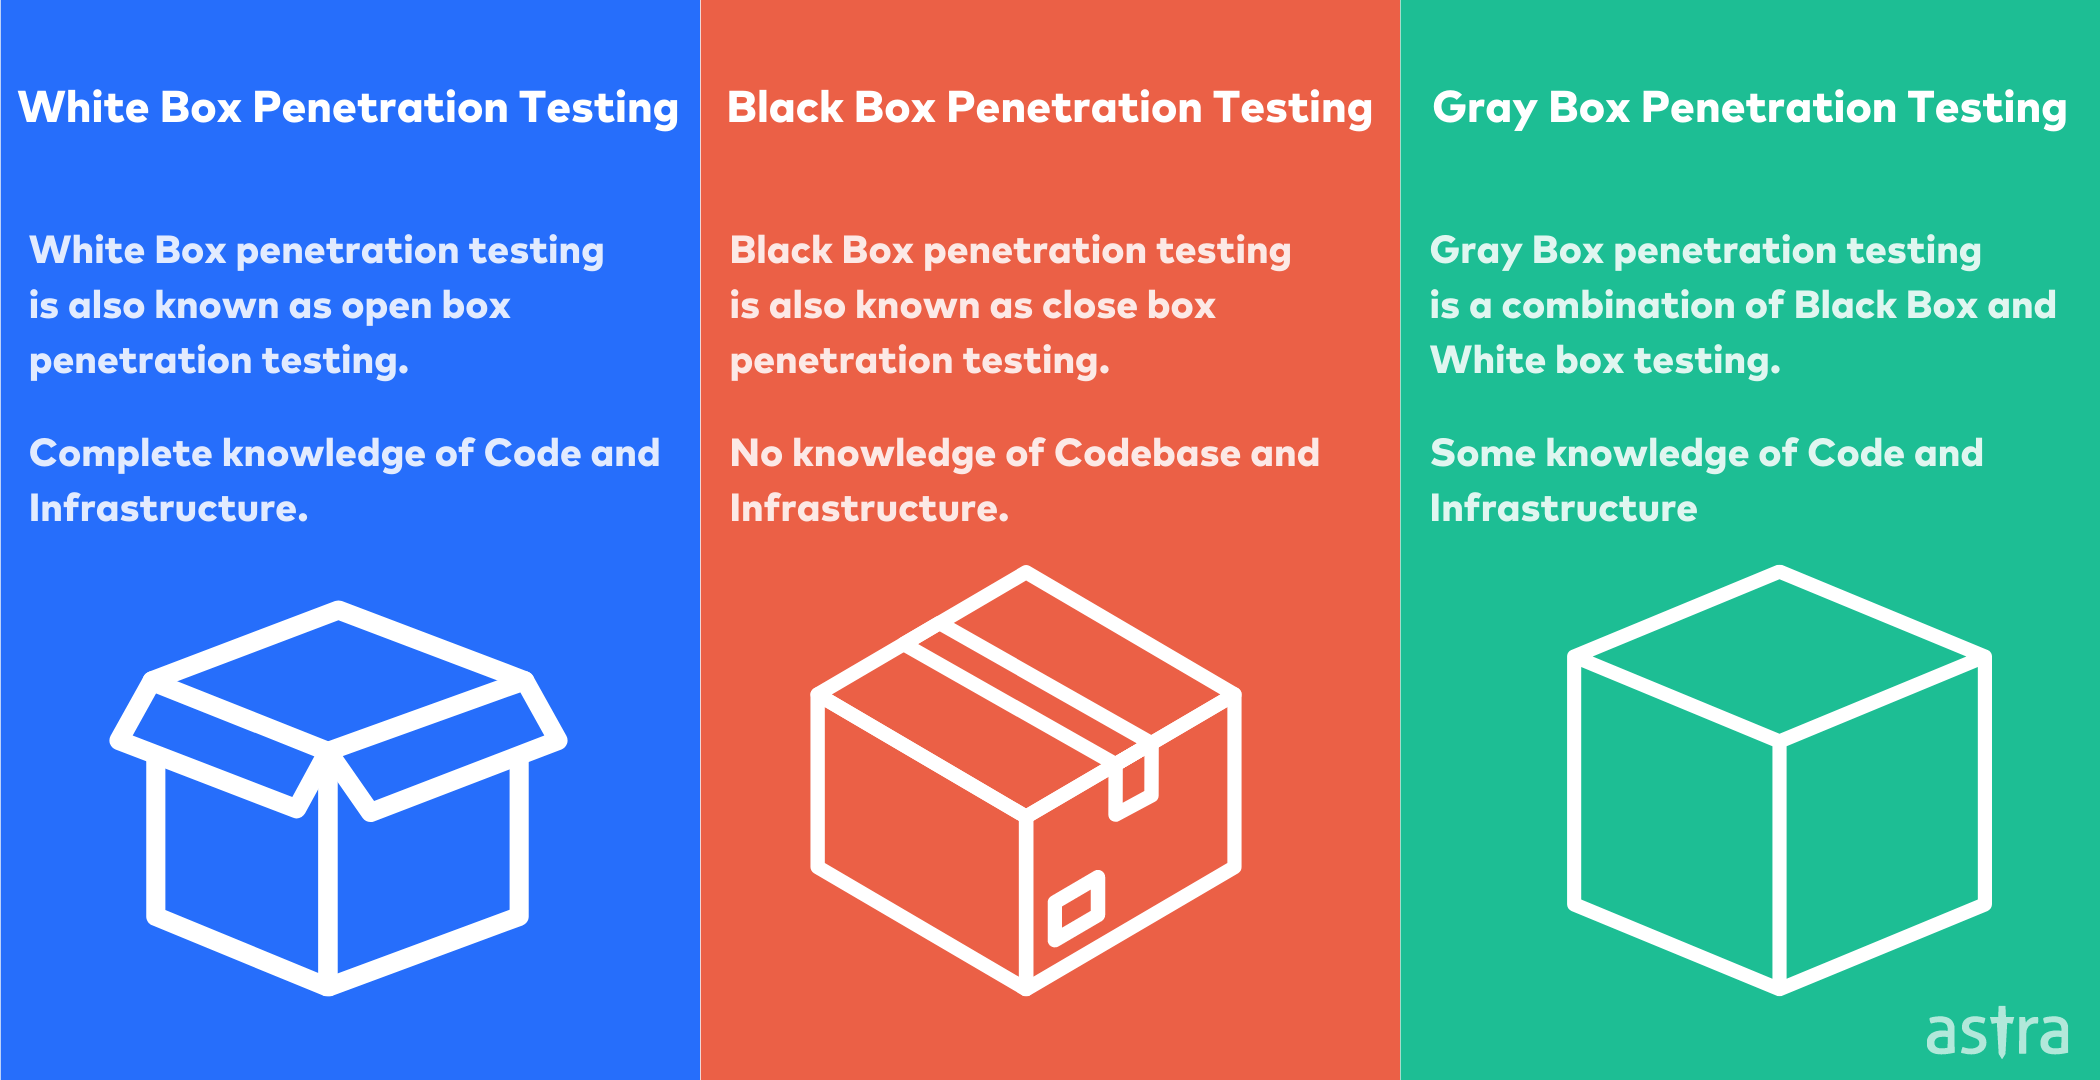 Different Approaches to perform penetration testing